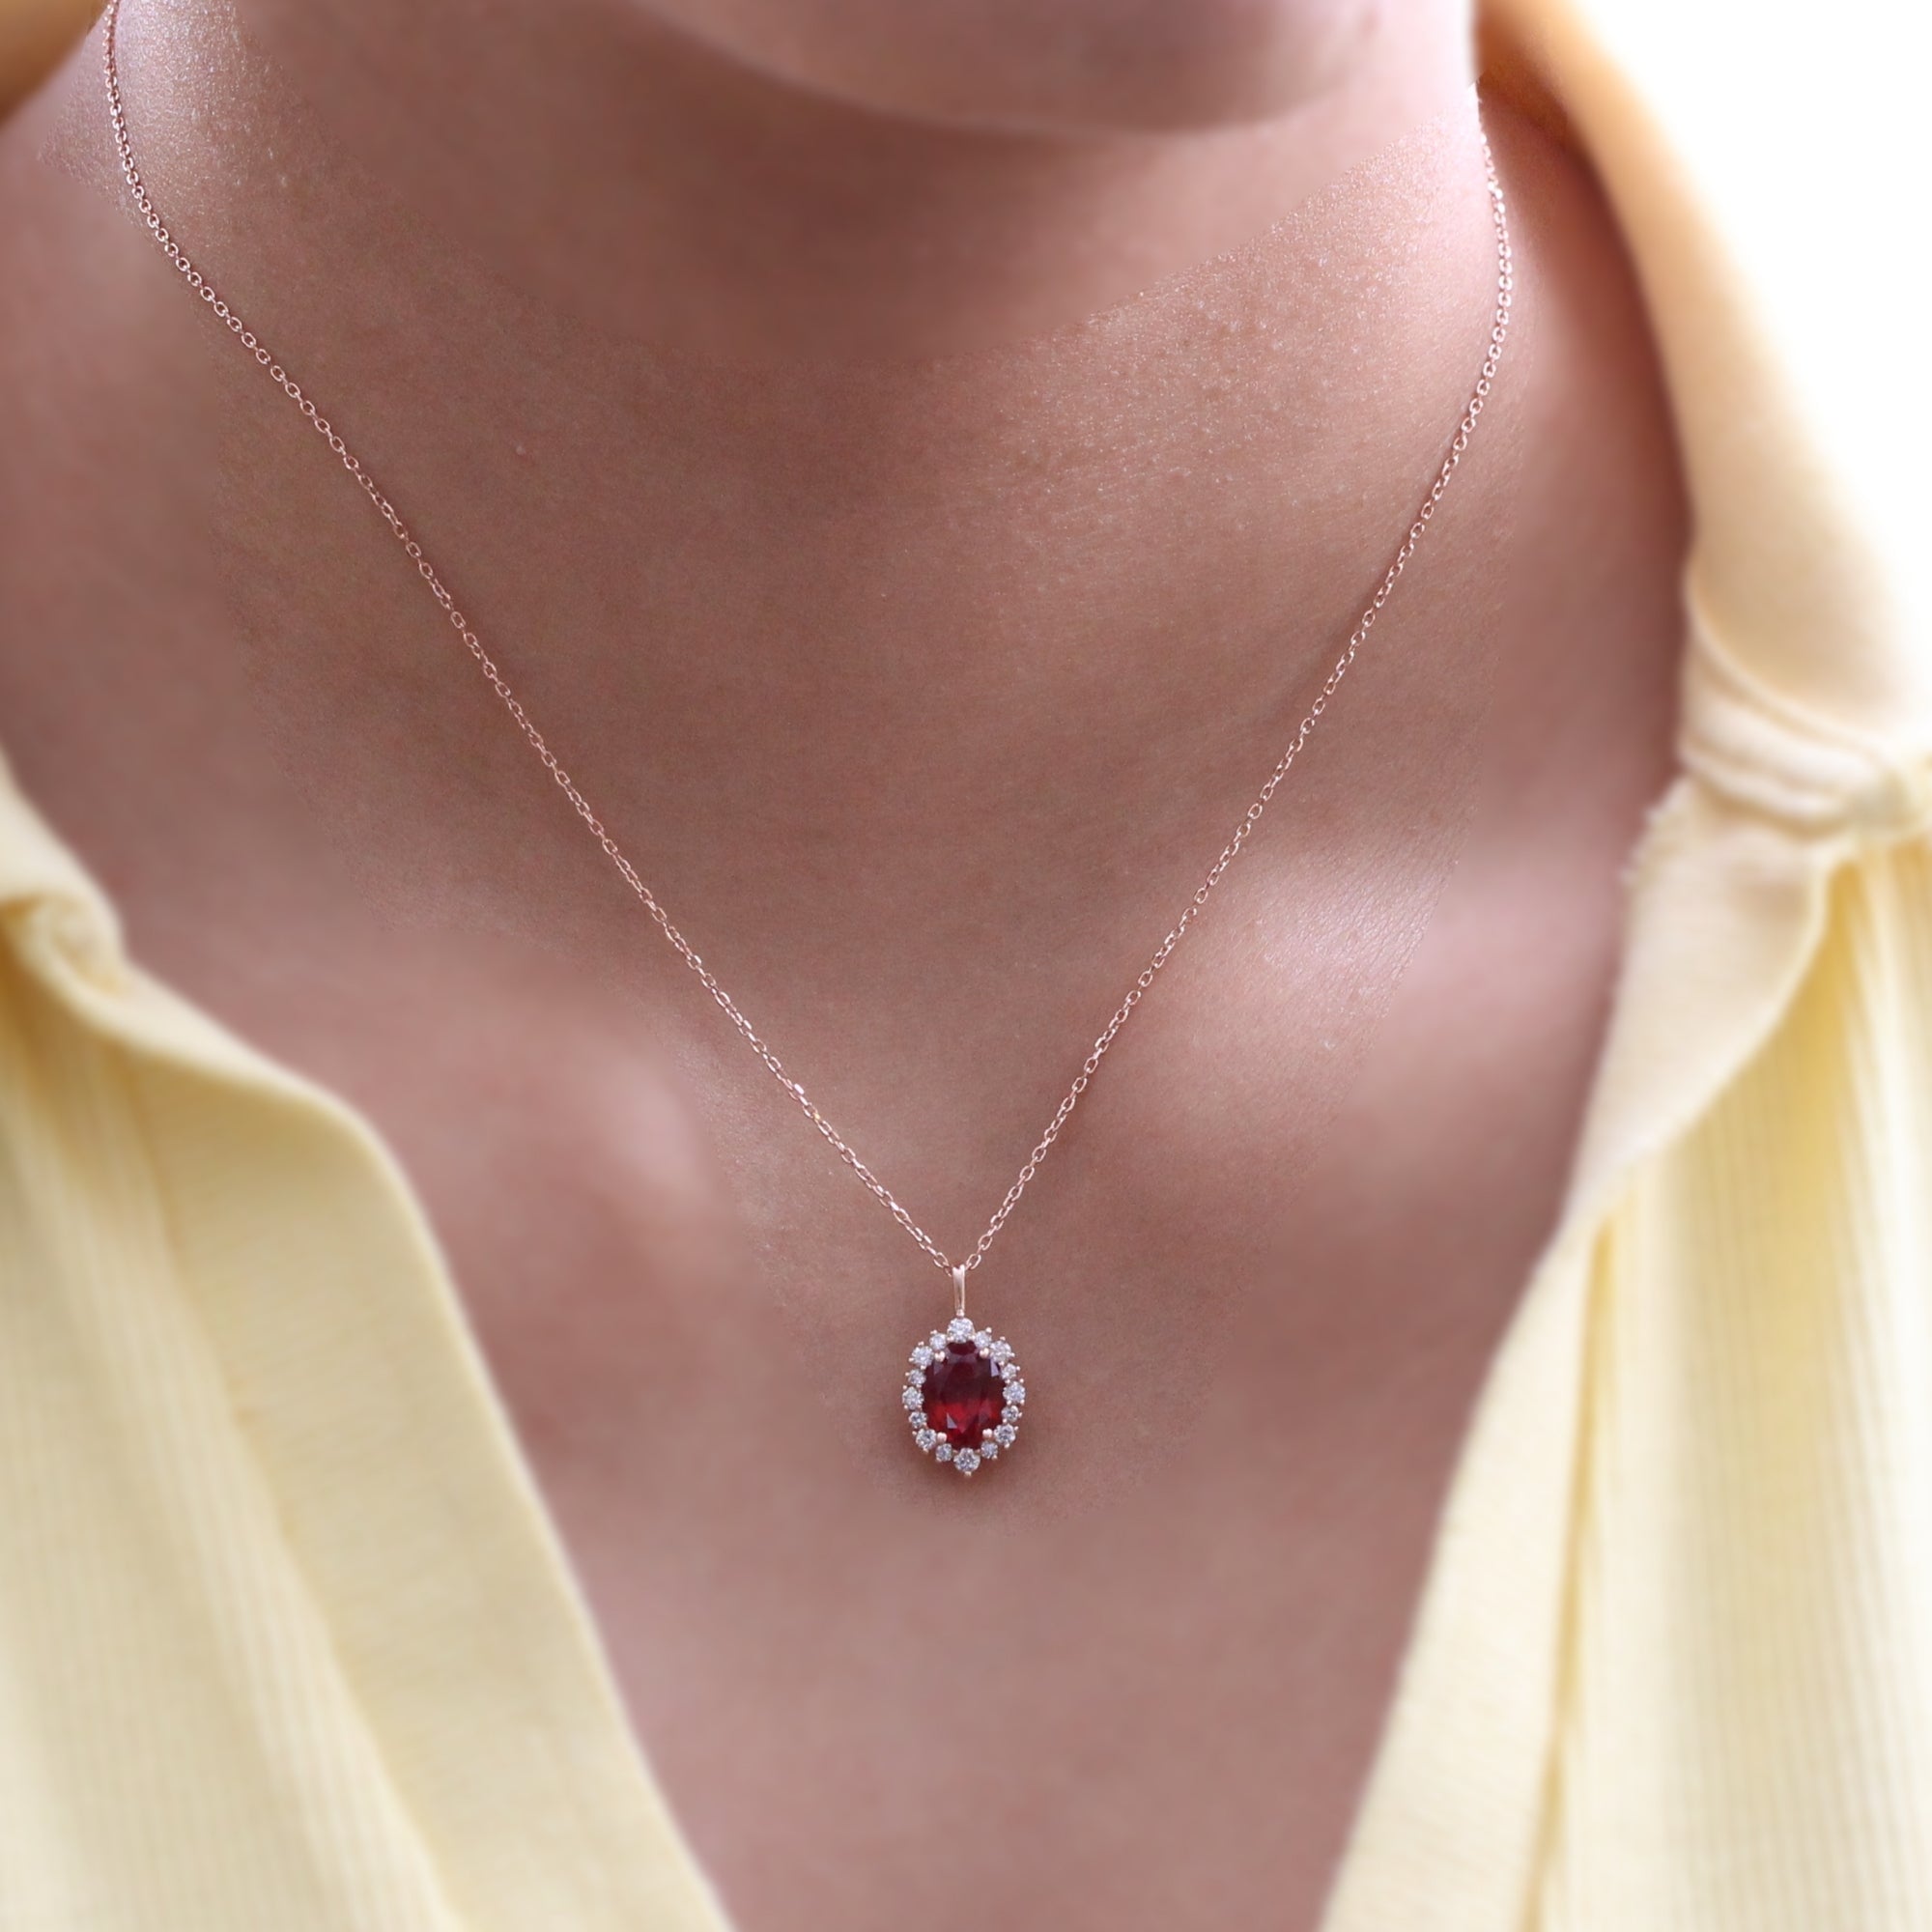 Oval ruby necklace rose gold halo style ruby diamond drop pendant necklace la more design jewelry